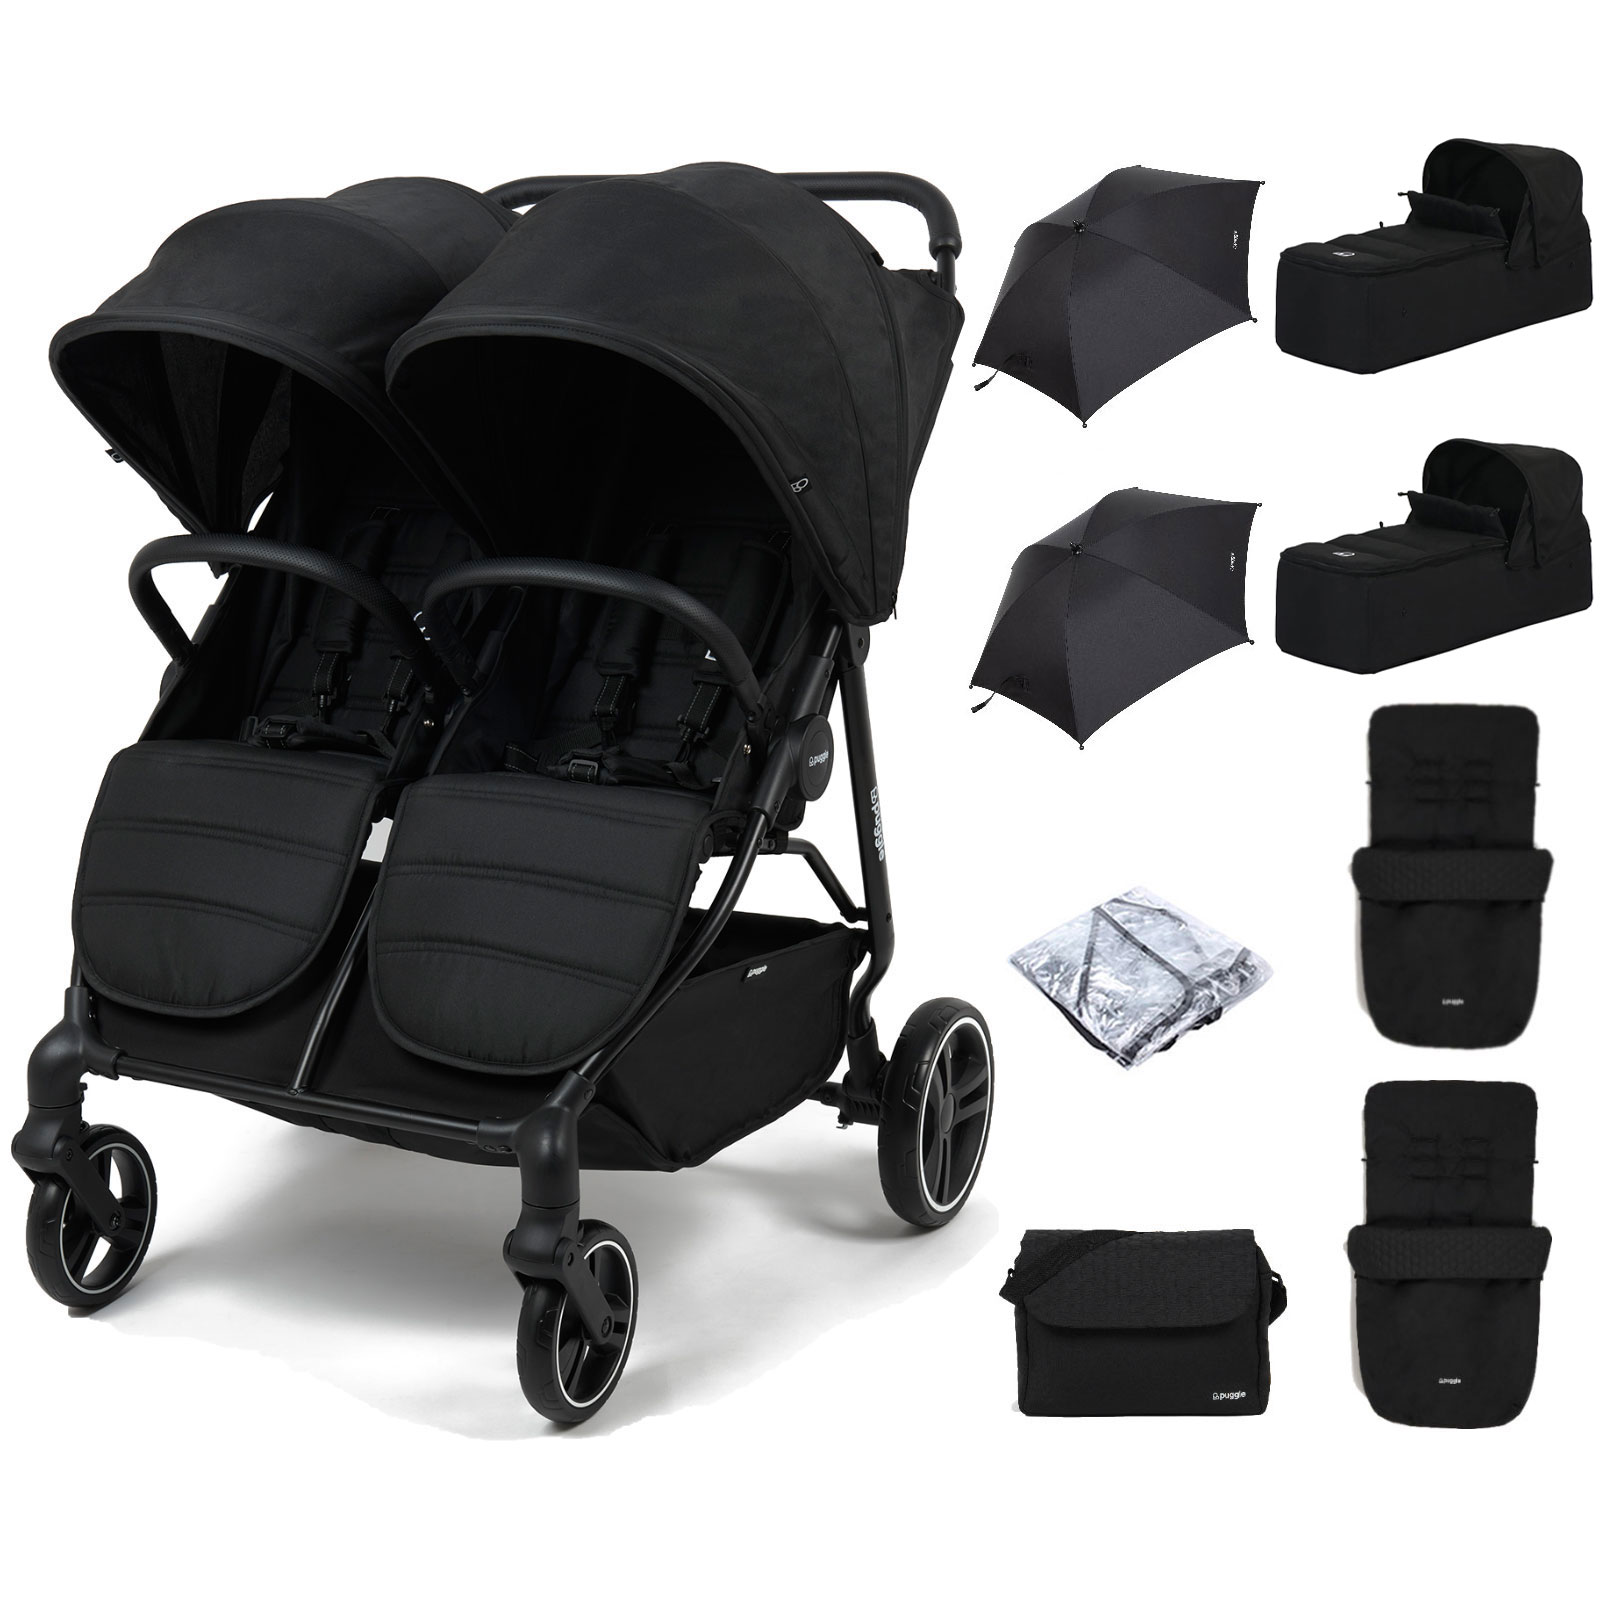 Puggle Urban City Easyfold Twin Pushchair with 2 Carrycots, 2 Footmuffs, 2 Parasols & Changing Bag – Storm Black